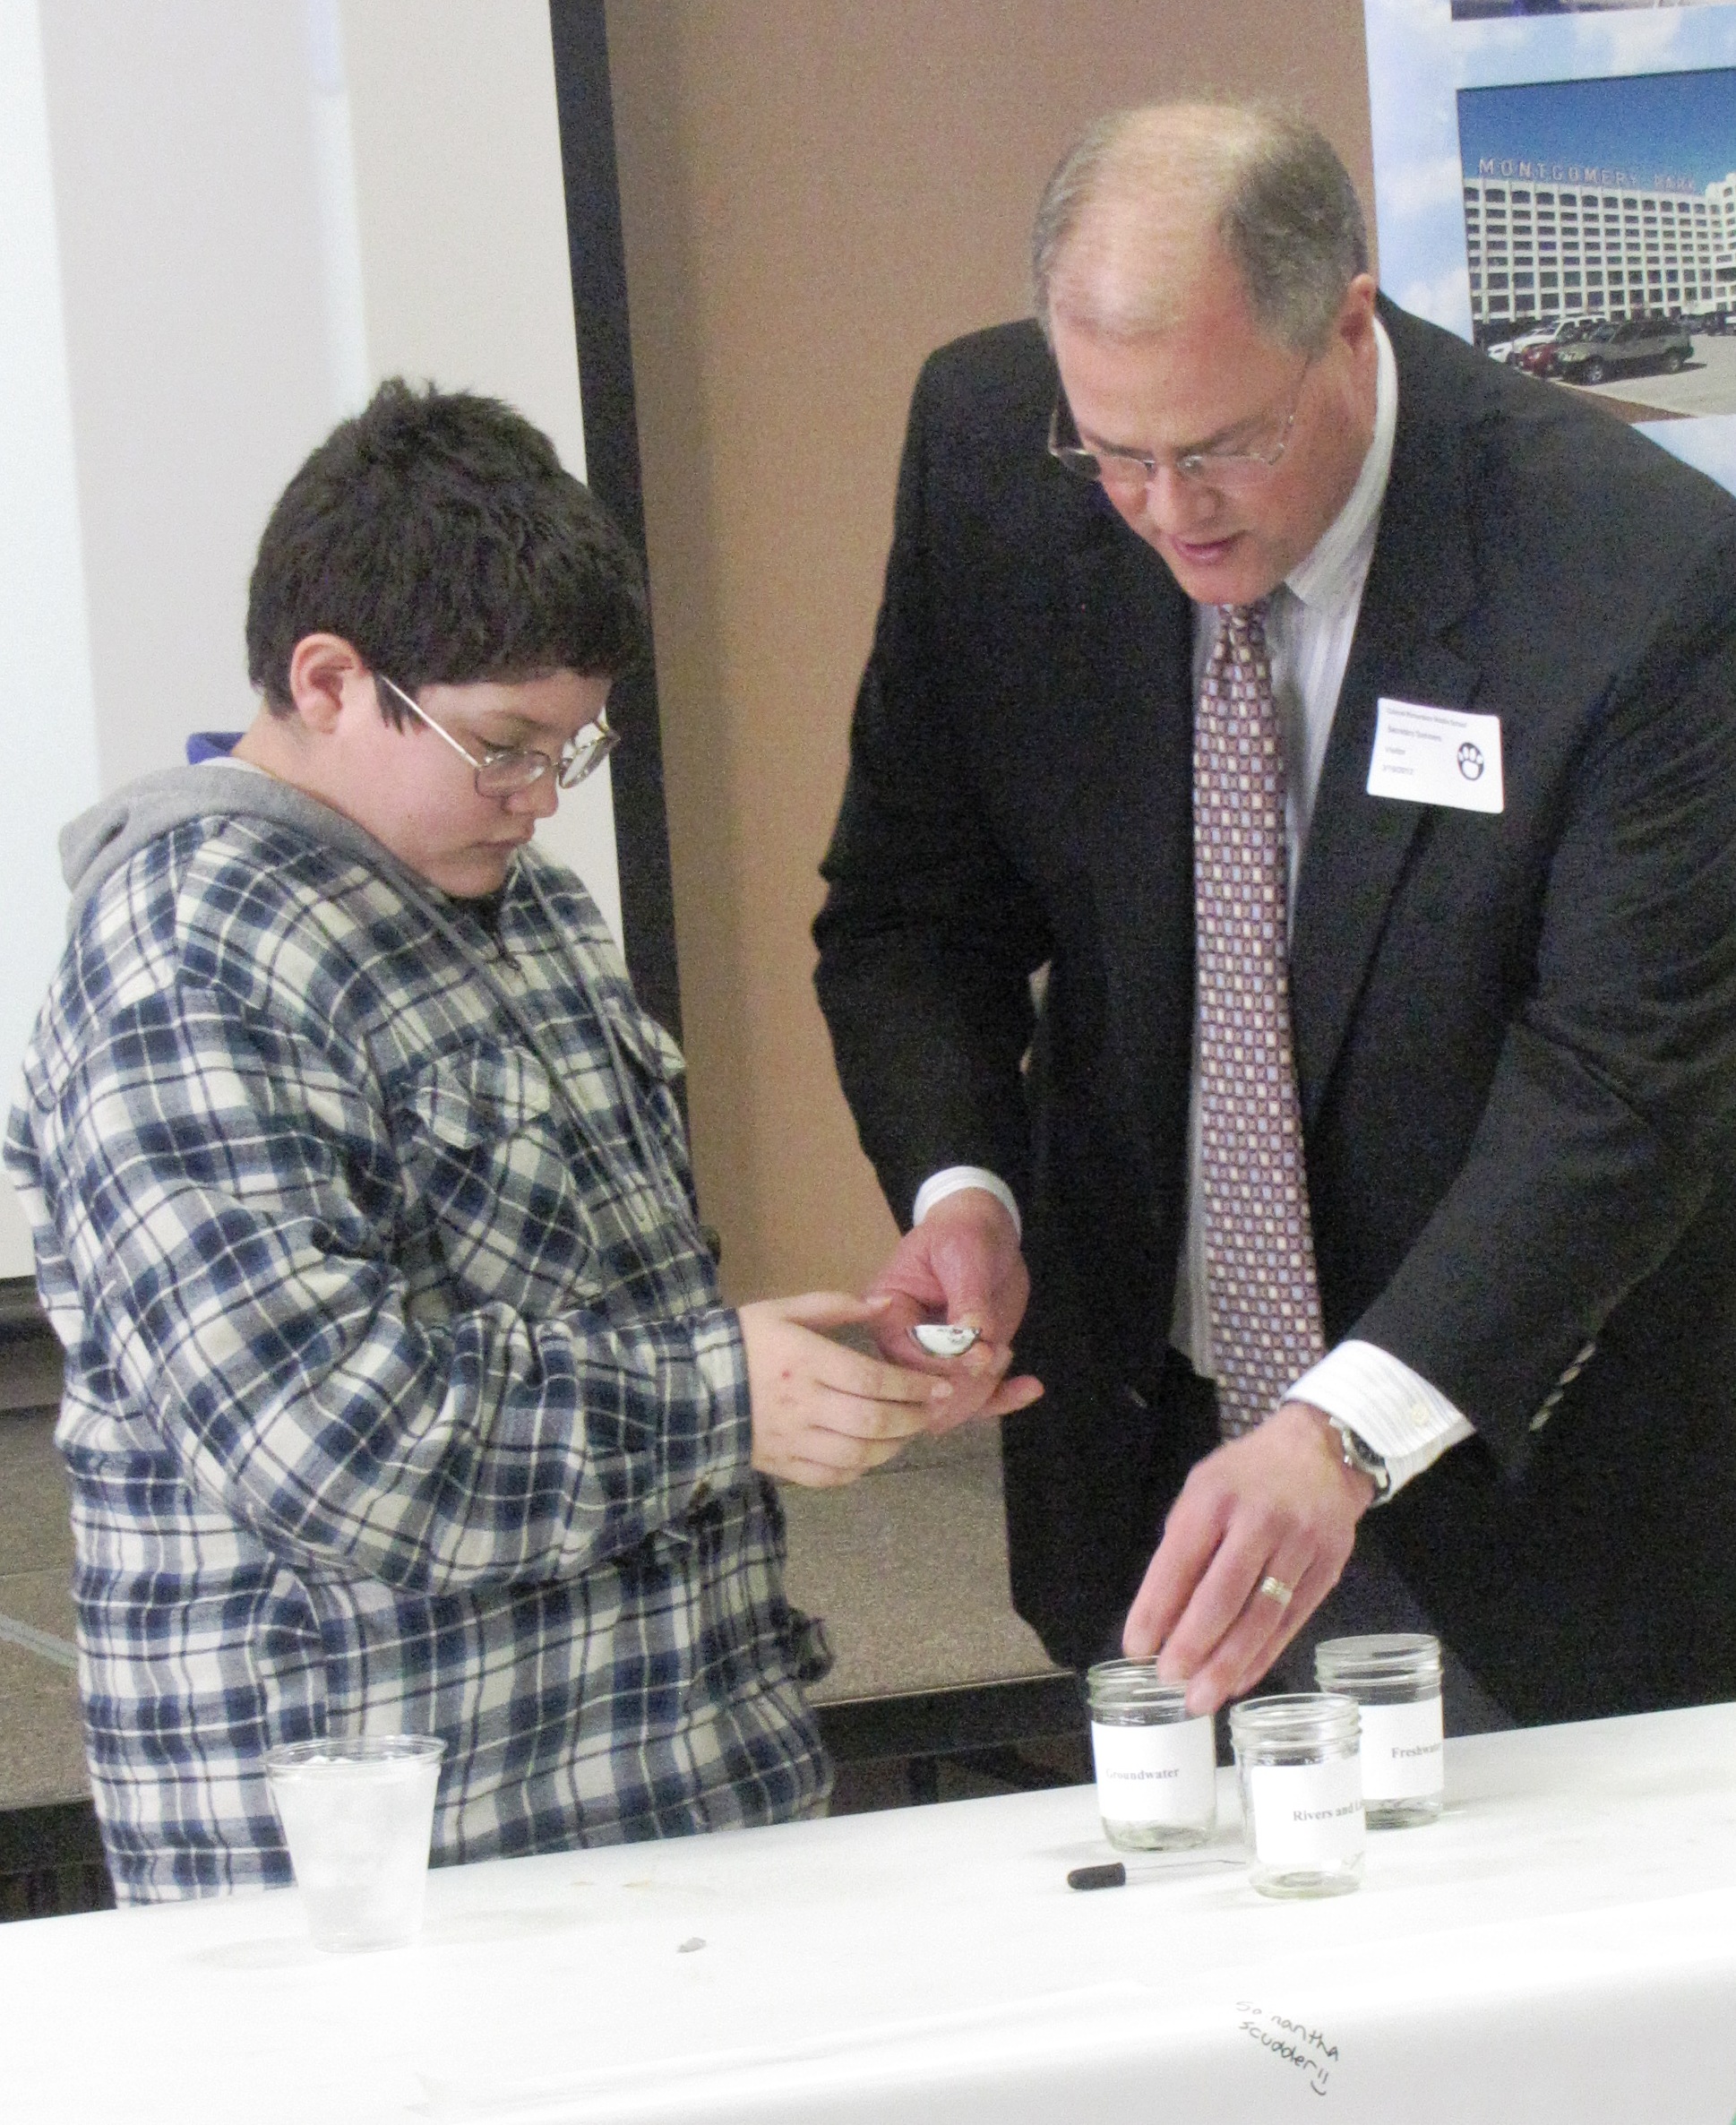 Secretary Summers conducts a groundwater demonstration with students at Col. Richardson Middle School